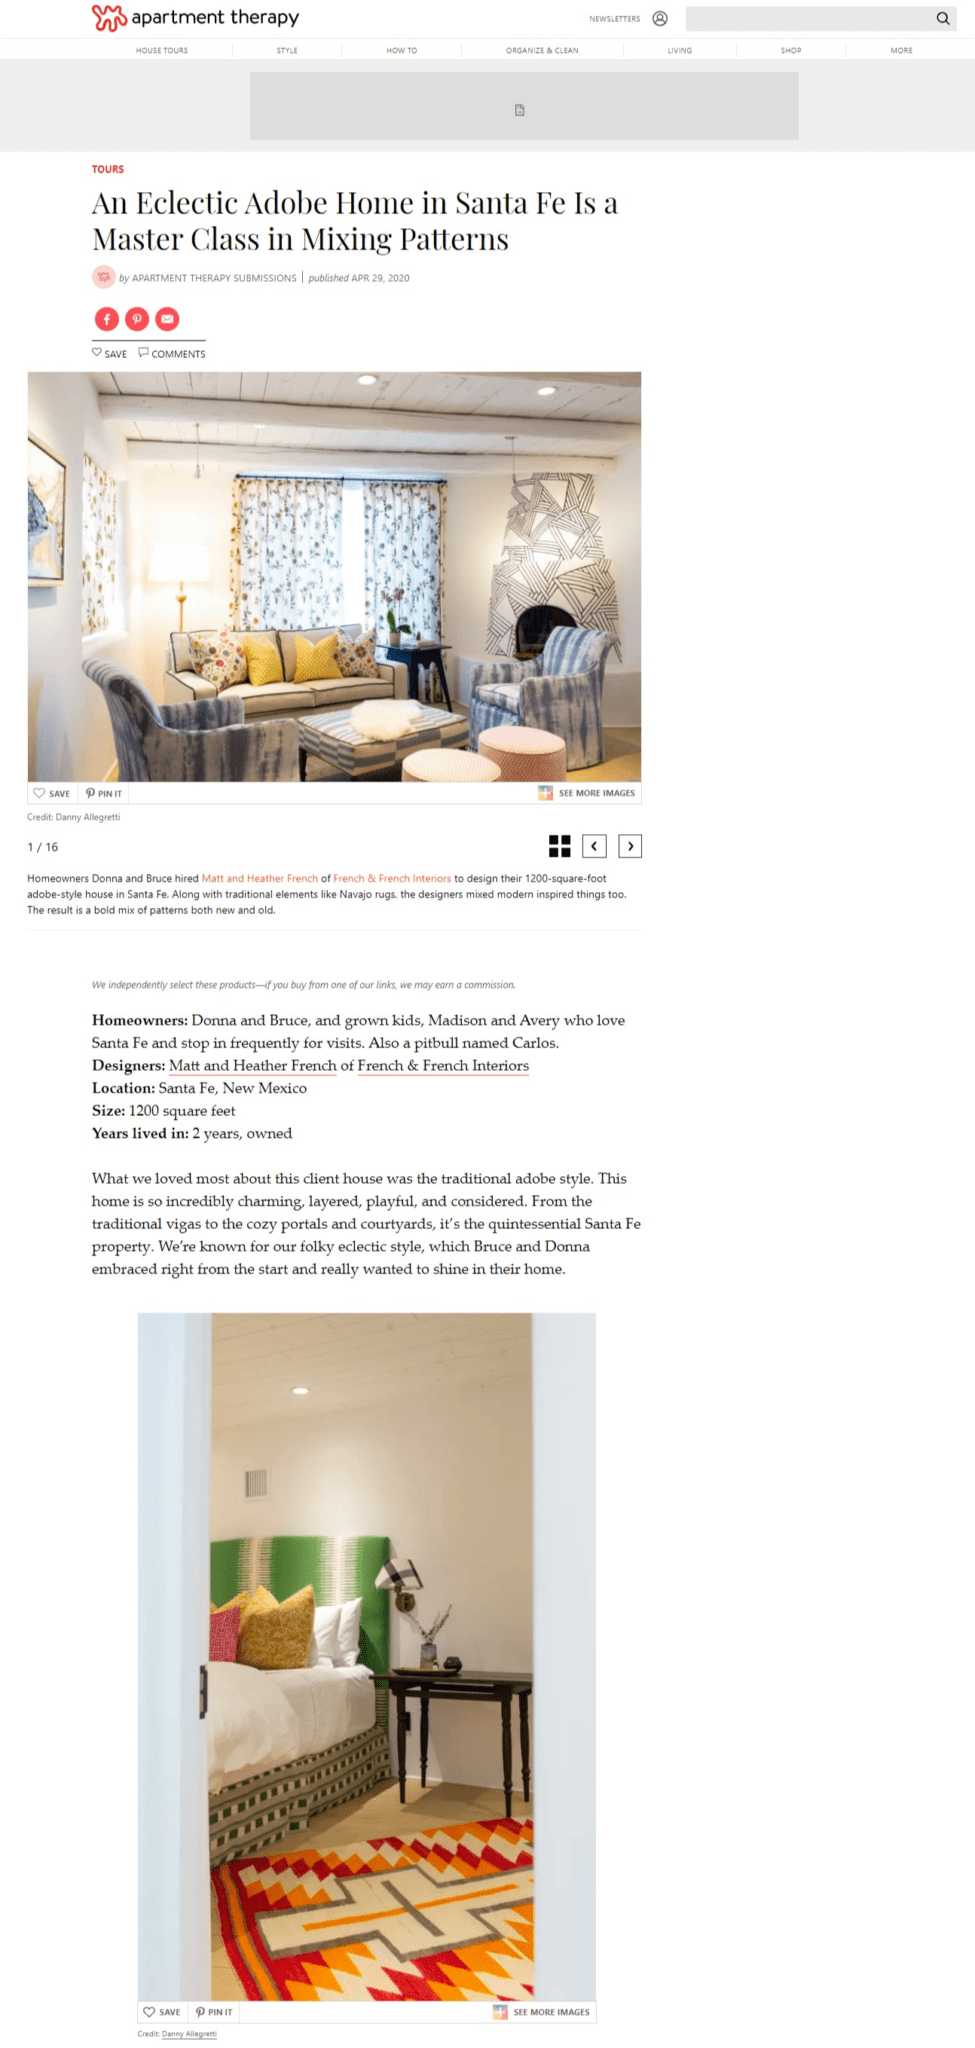 An Eclectic Adobe Home apartment therapy article featuring french and french interiors